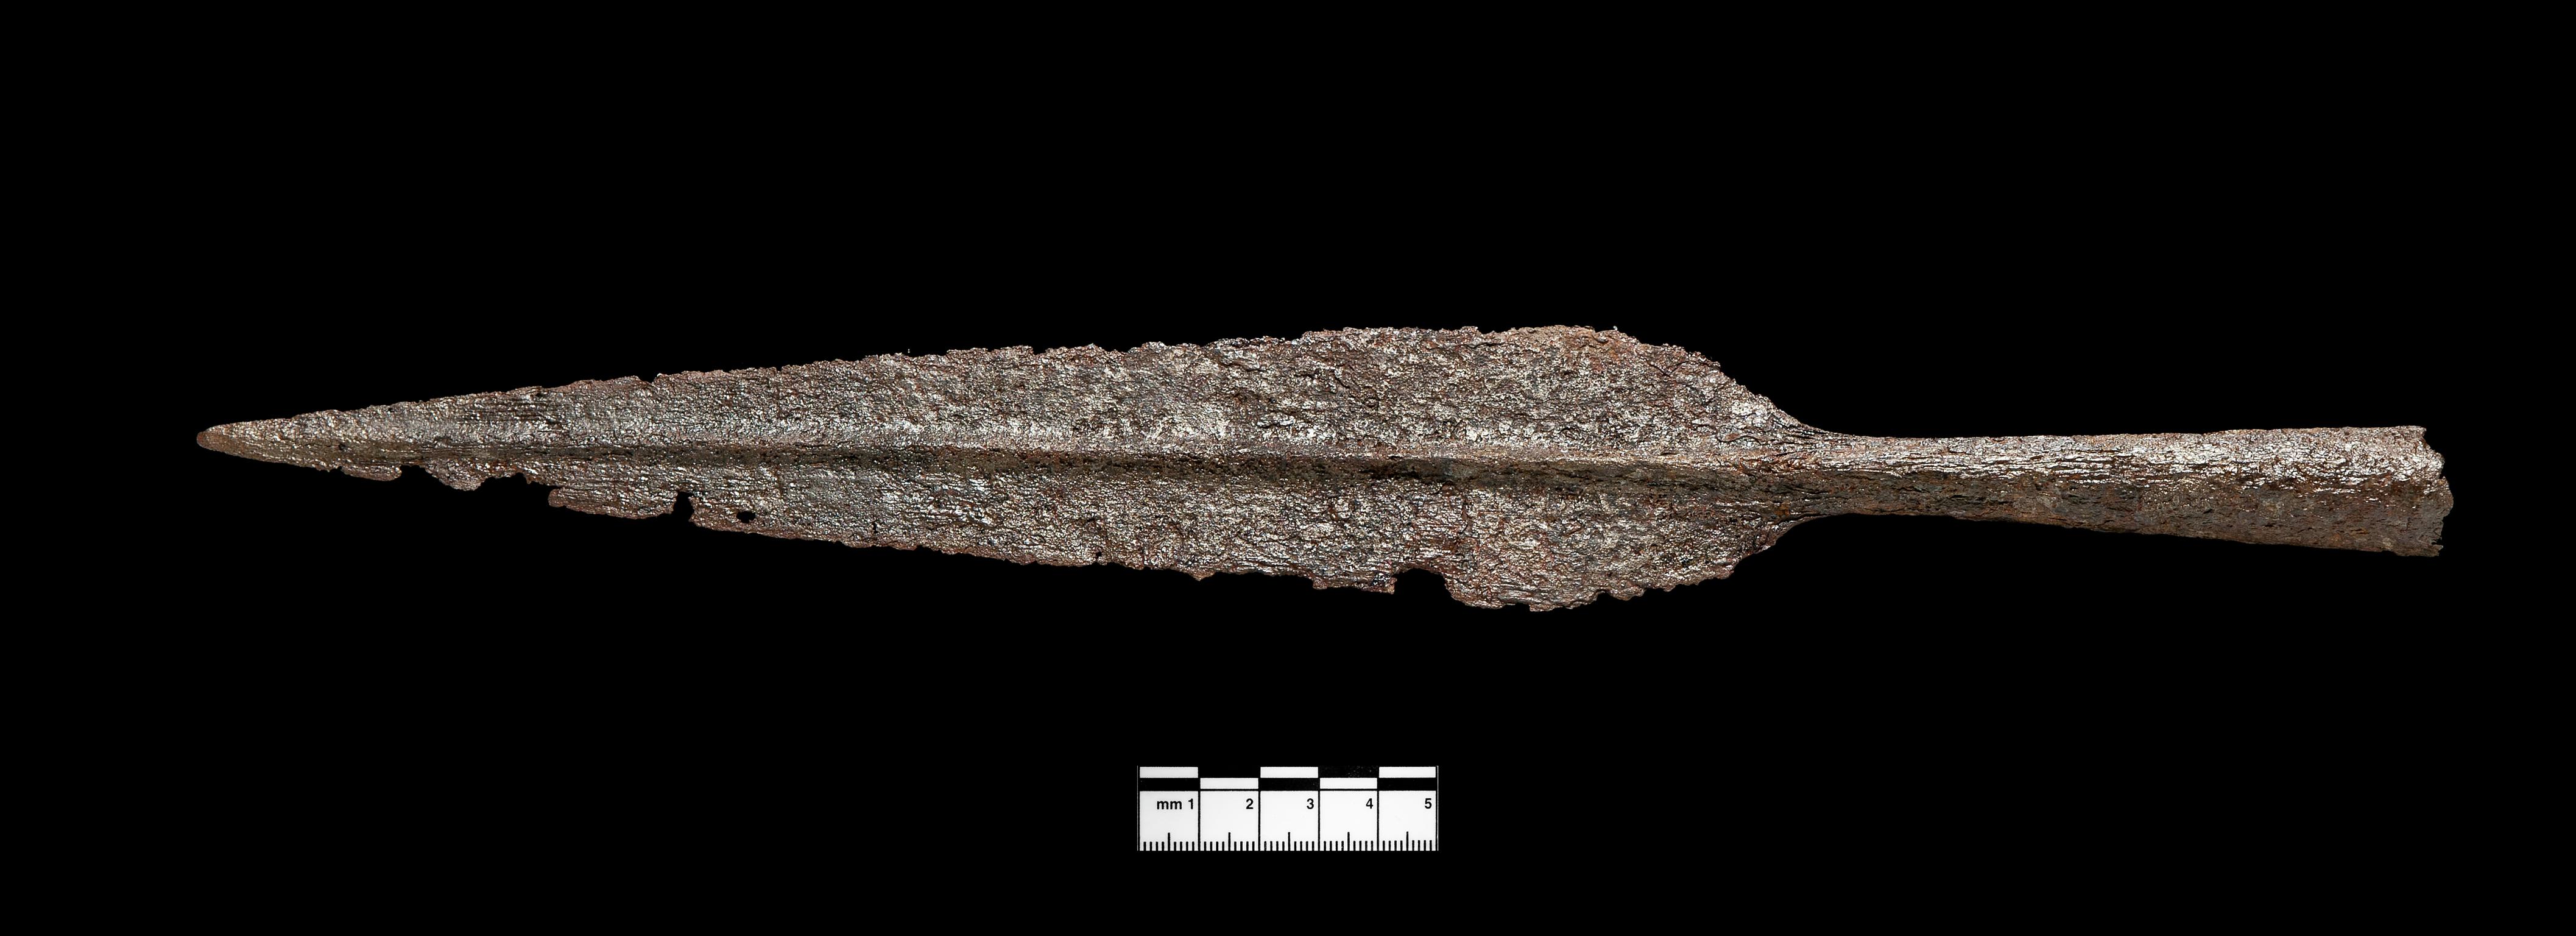 Iron Age iron socketed spearhead